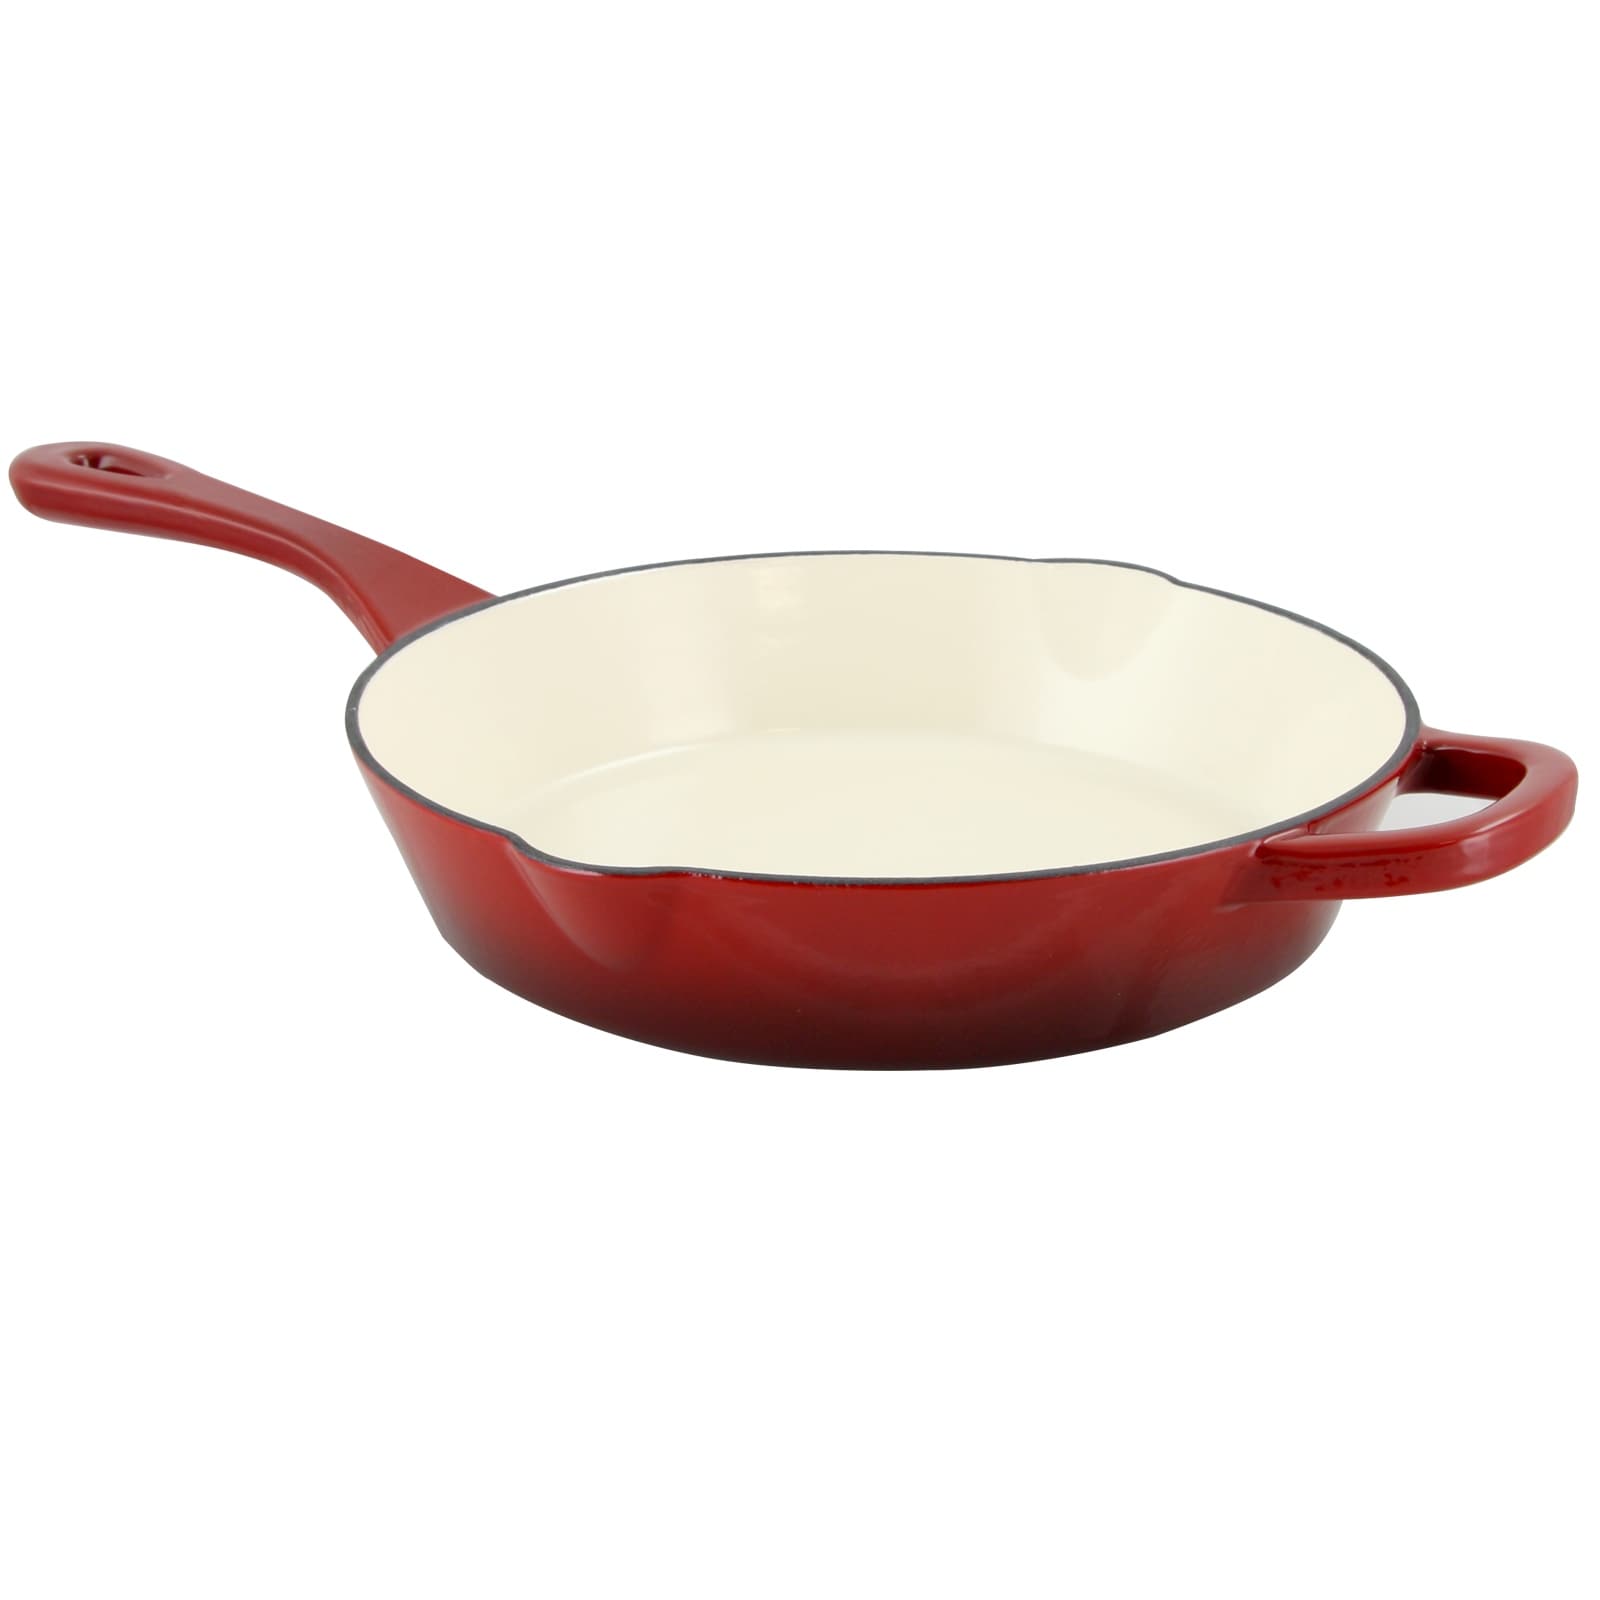 https://ak1.ostkcdn.com/images/products/is/images/direct/1119df0ccc3eb3084ca6bf4be2551c326cda4f5b/Crock-Pot-Artisan-Enameled-10%22-Round-Cast-Iron-Skillet-in-Scarlet-Red.jpg